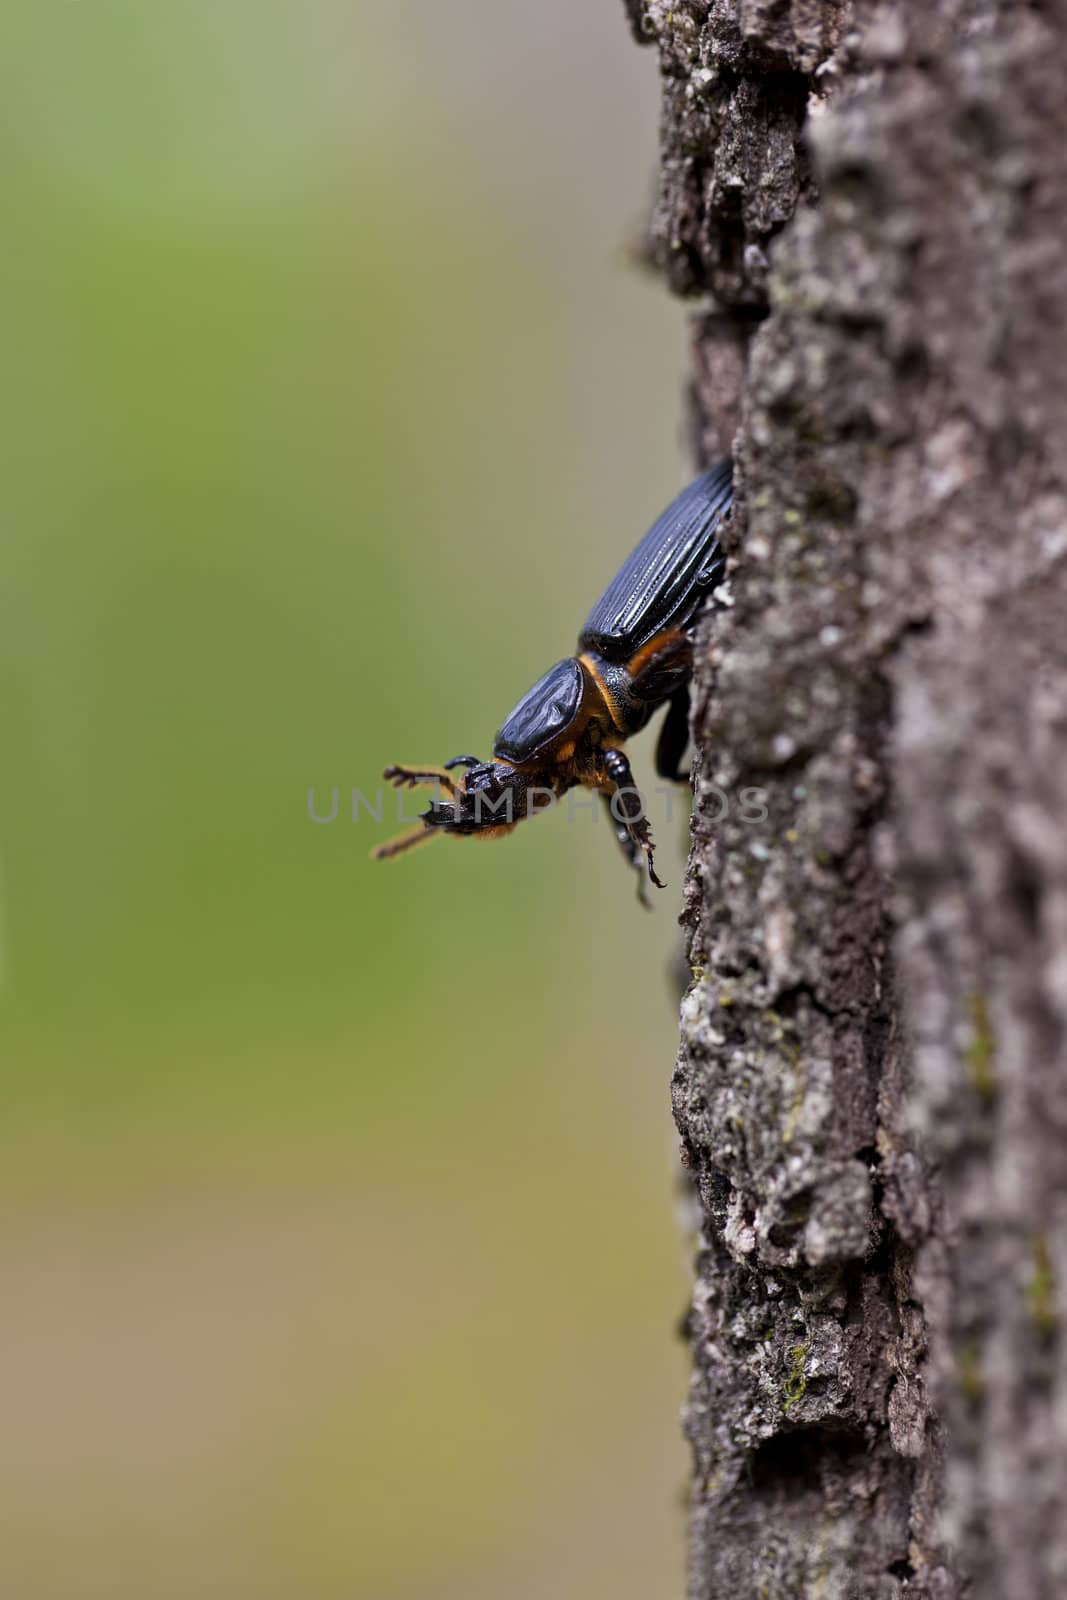 A macro shot of a patent-leather beetle also known as the Jerusalem beetle (Odontotaenius disjunctus) on the side of a tree with room for copy space.